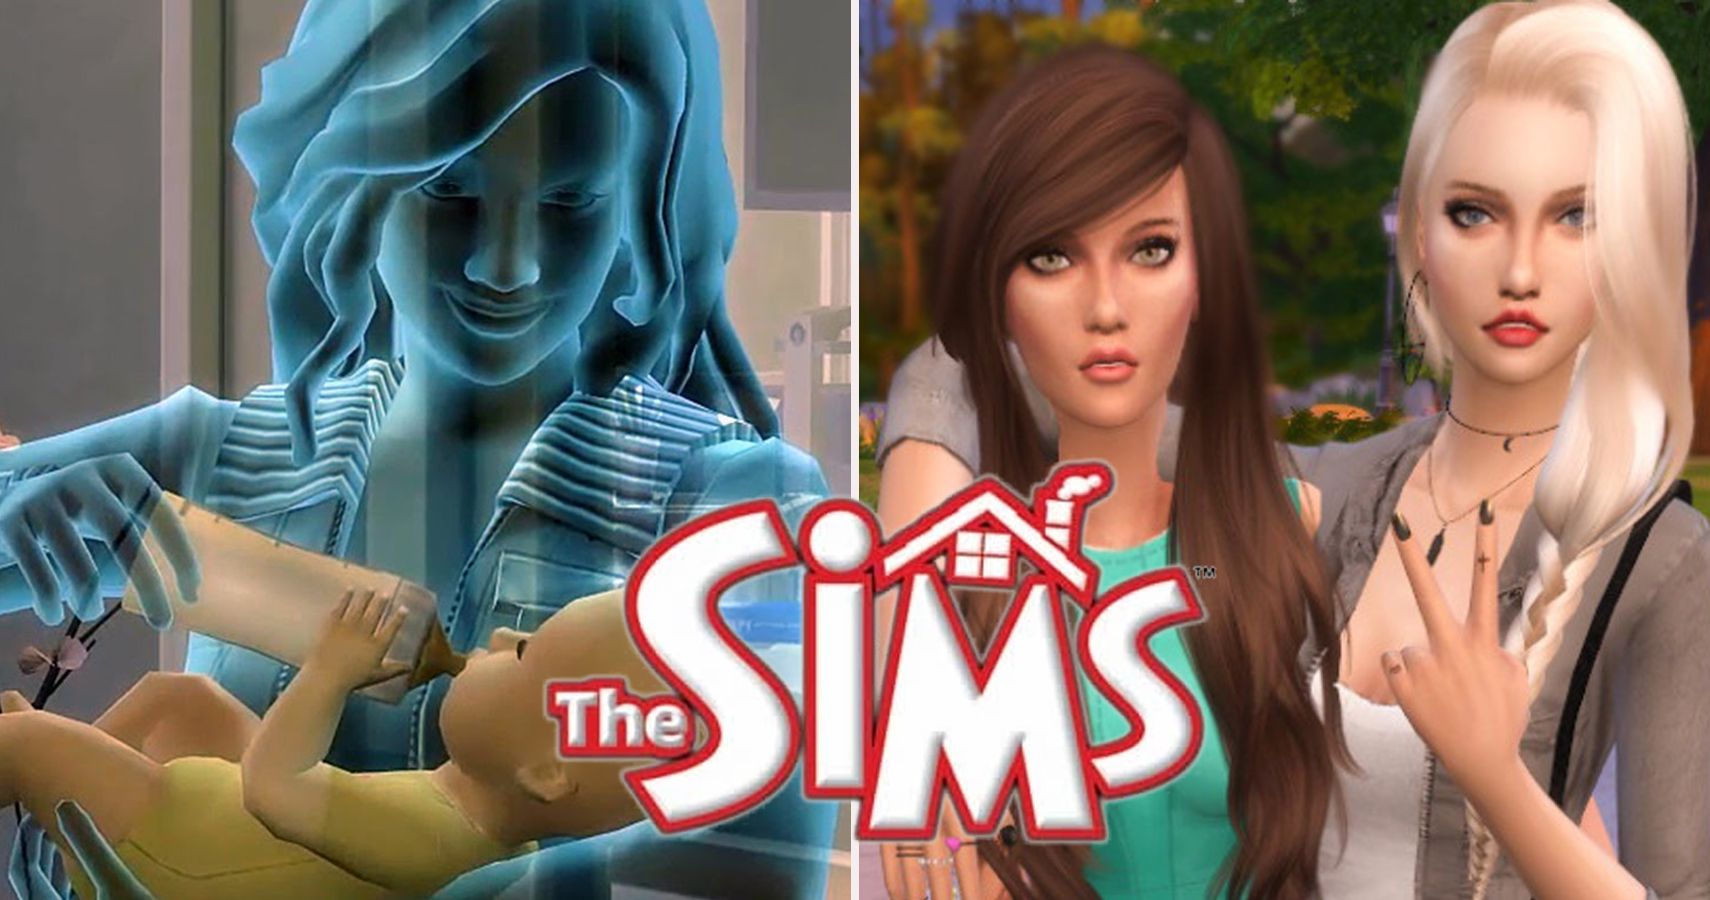 Play The Sims Online for Free - BeyondSims